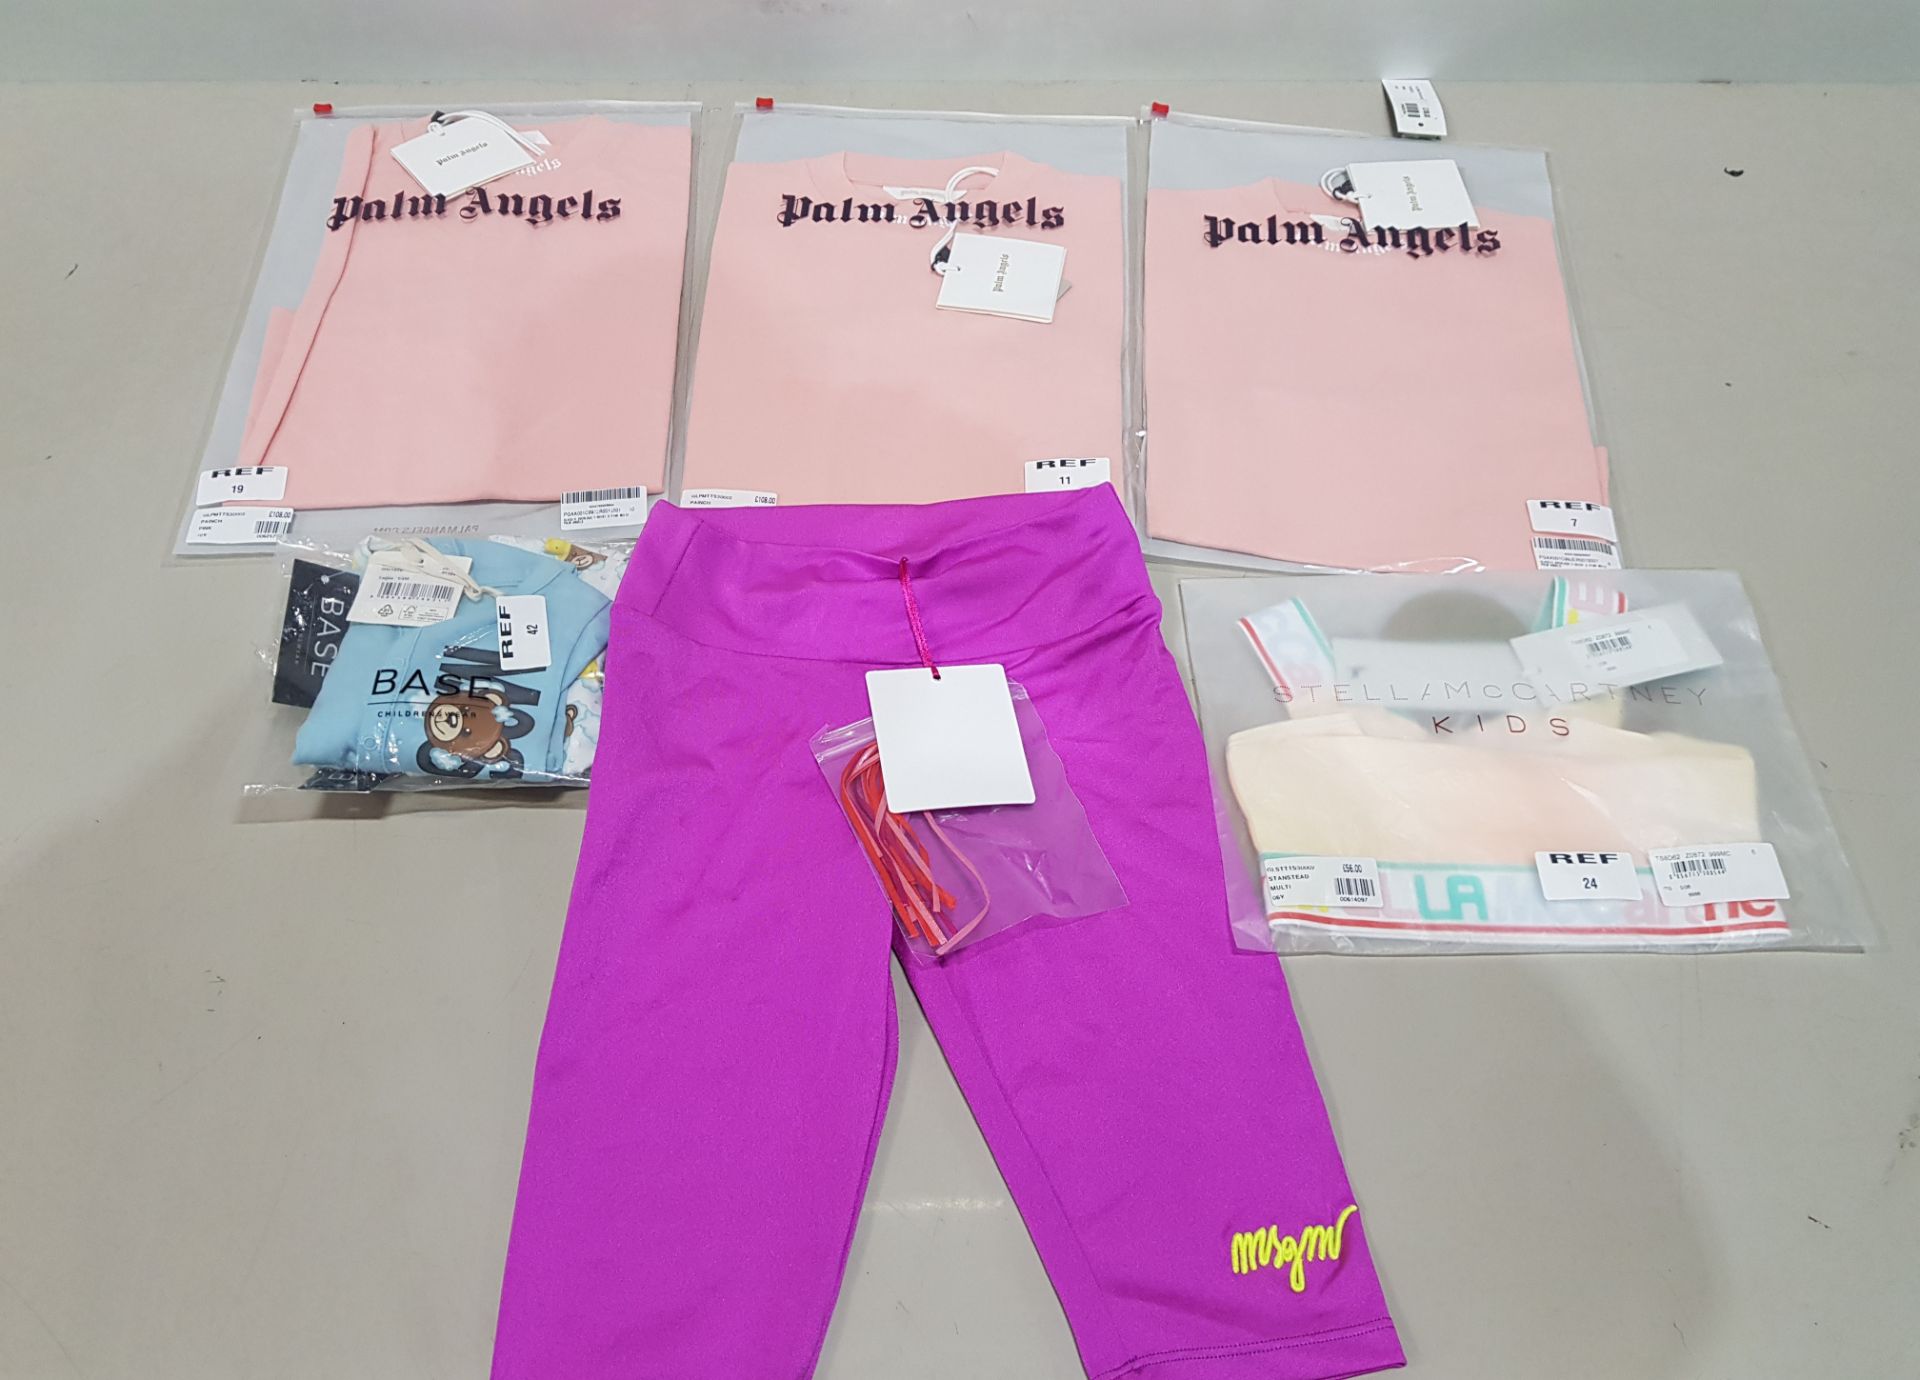 6 X BRAND NEW MIXED CLOTHING LOT TO INCLUDE - 3 X PALM ANGELS T-SHIRTS IN SIZES 6-8-10 YEARS - £